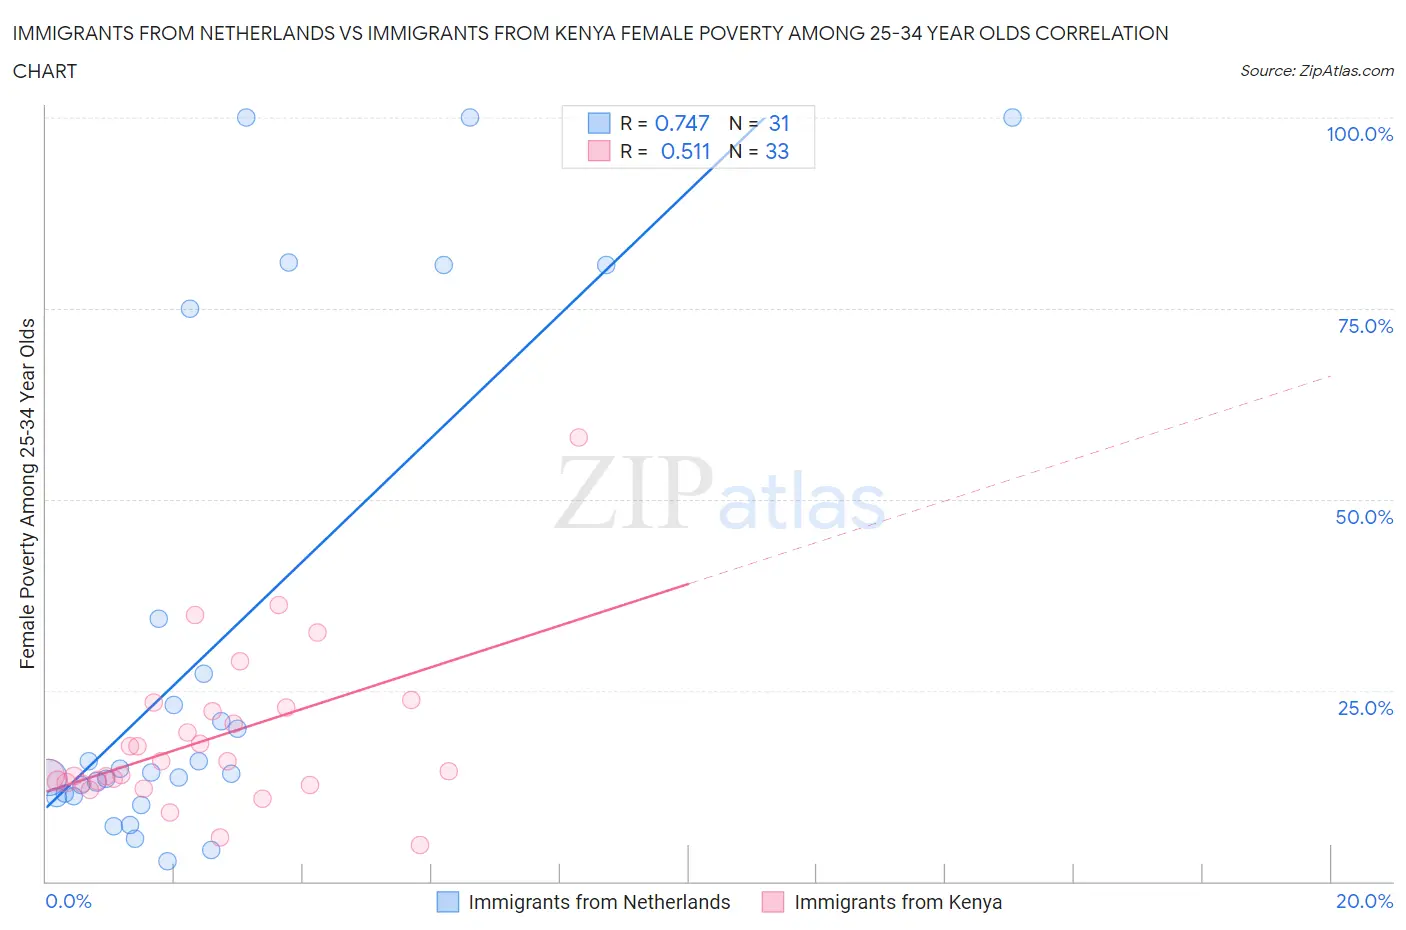 Immigrants from Netherlands vs Immigrants from Kenya Female Poverty Among 25-34 Year Olds